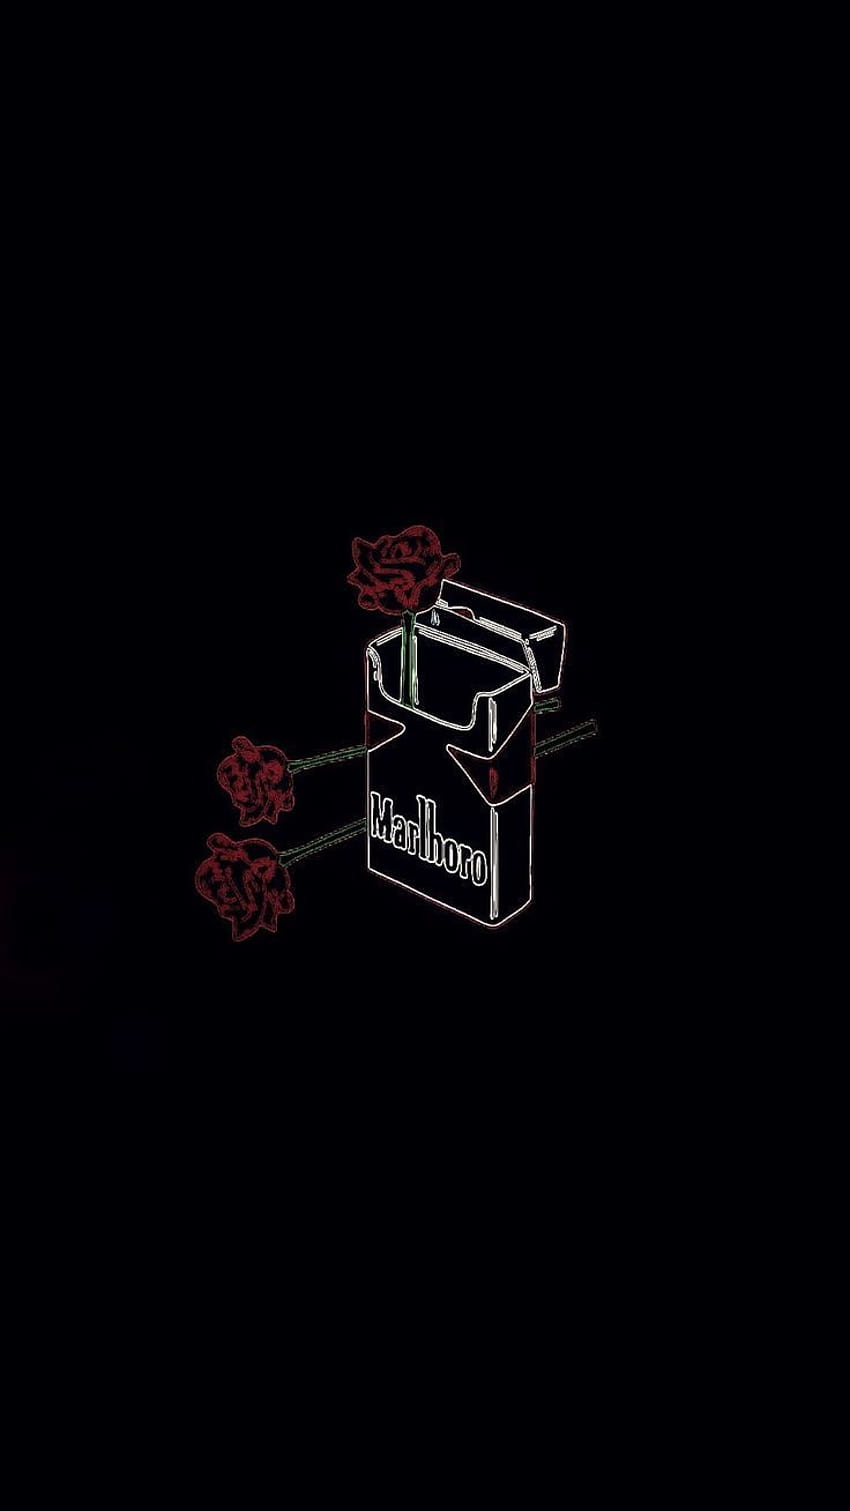 Aesthetic wallpaper of a cigarette box with roses. - February